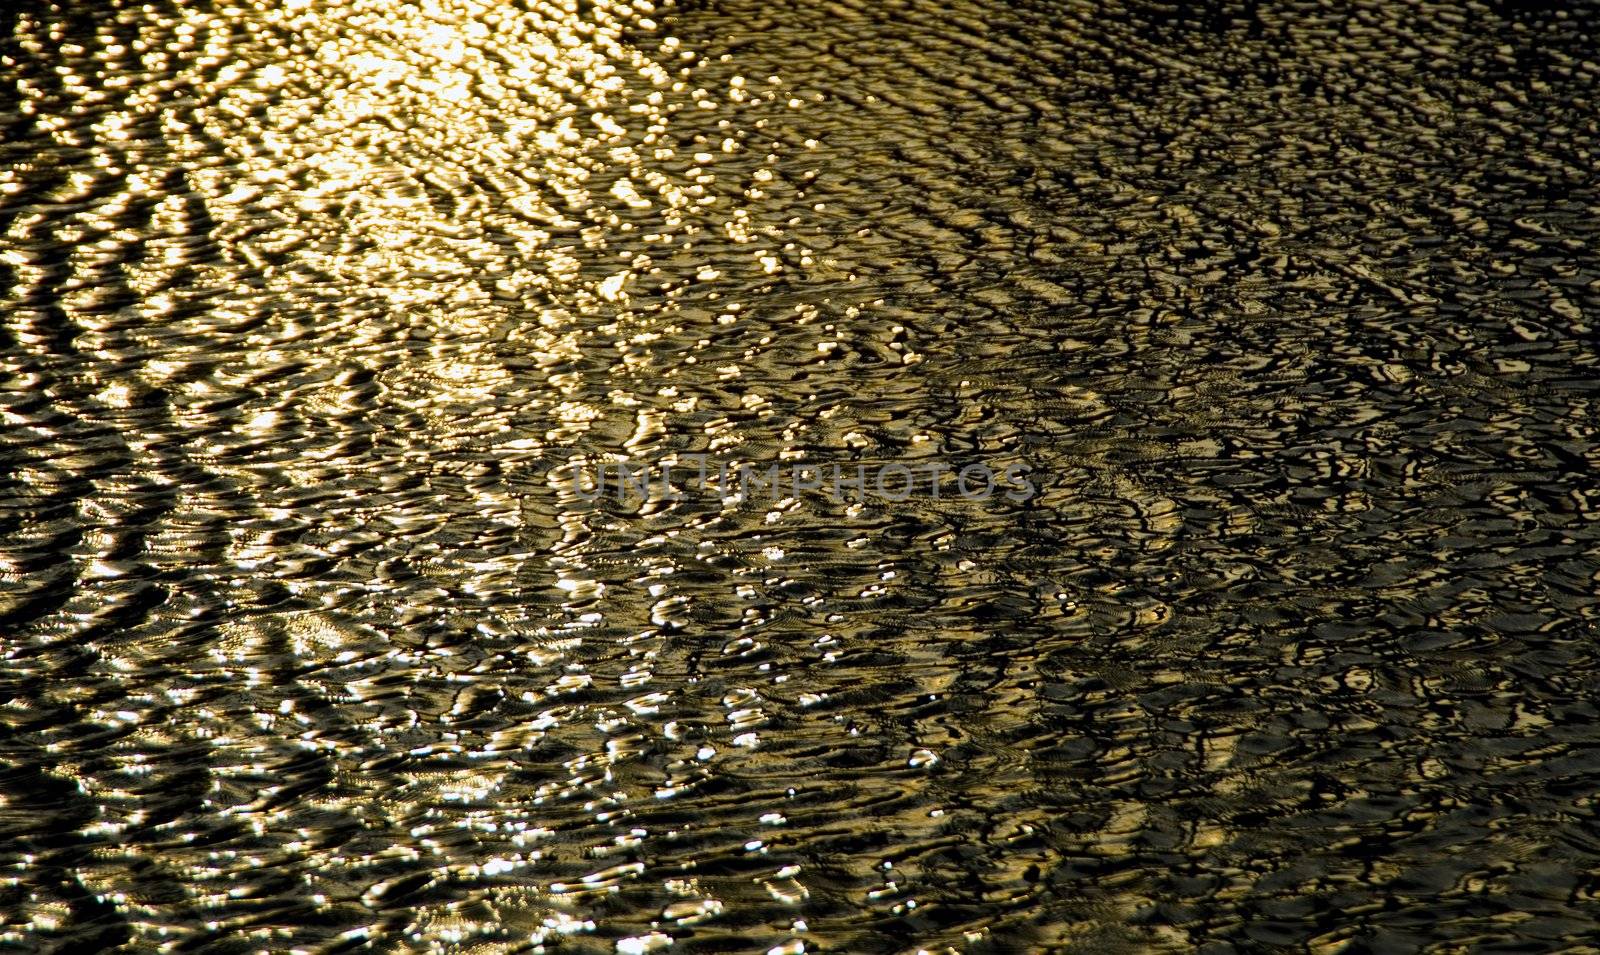 Sun rays on  water forming an abstract pattern